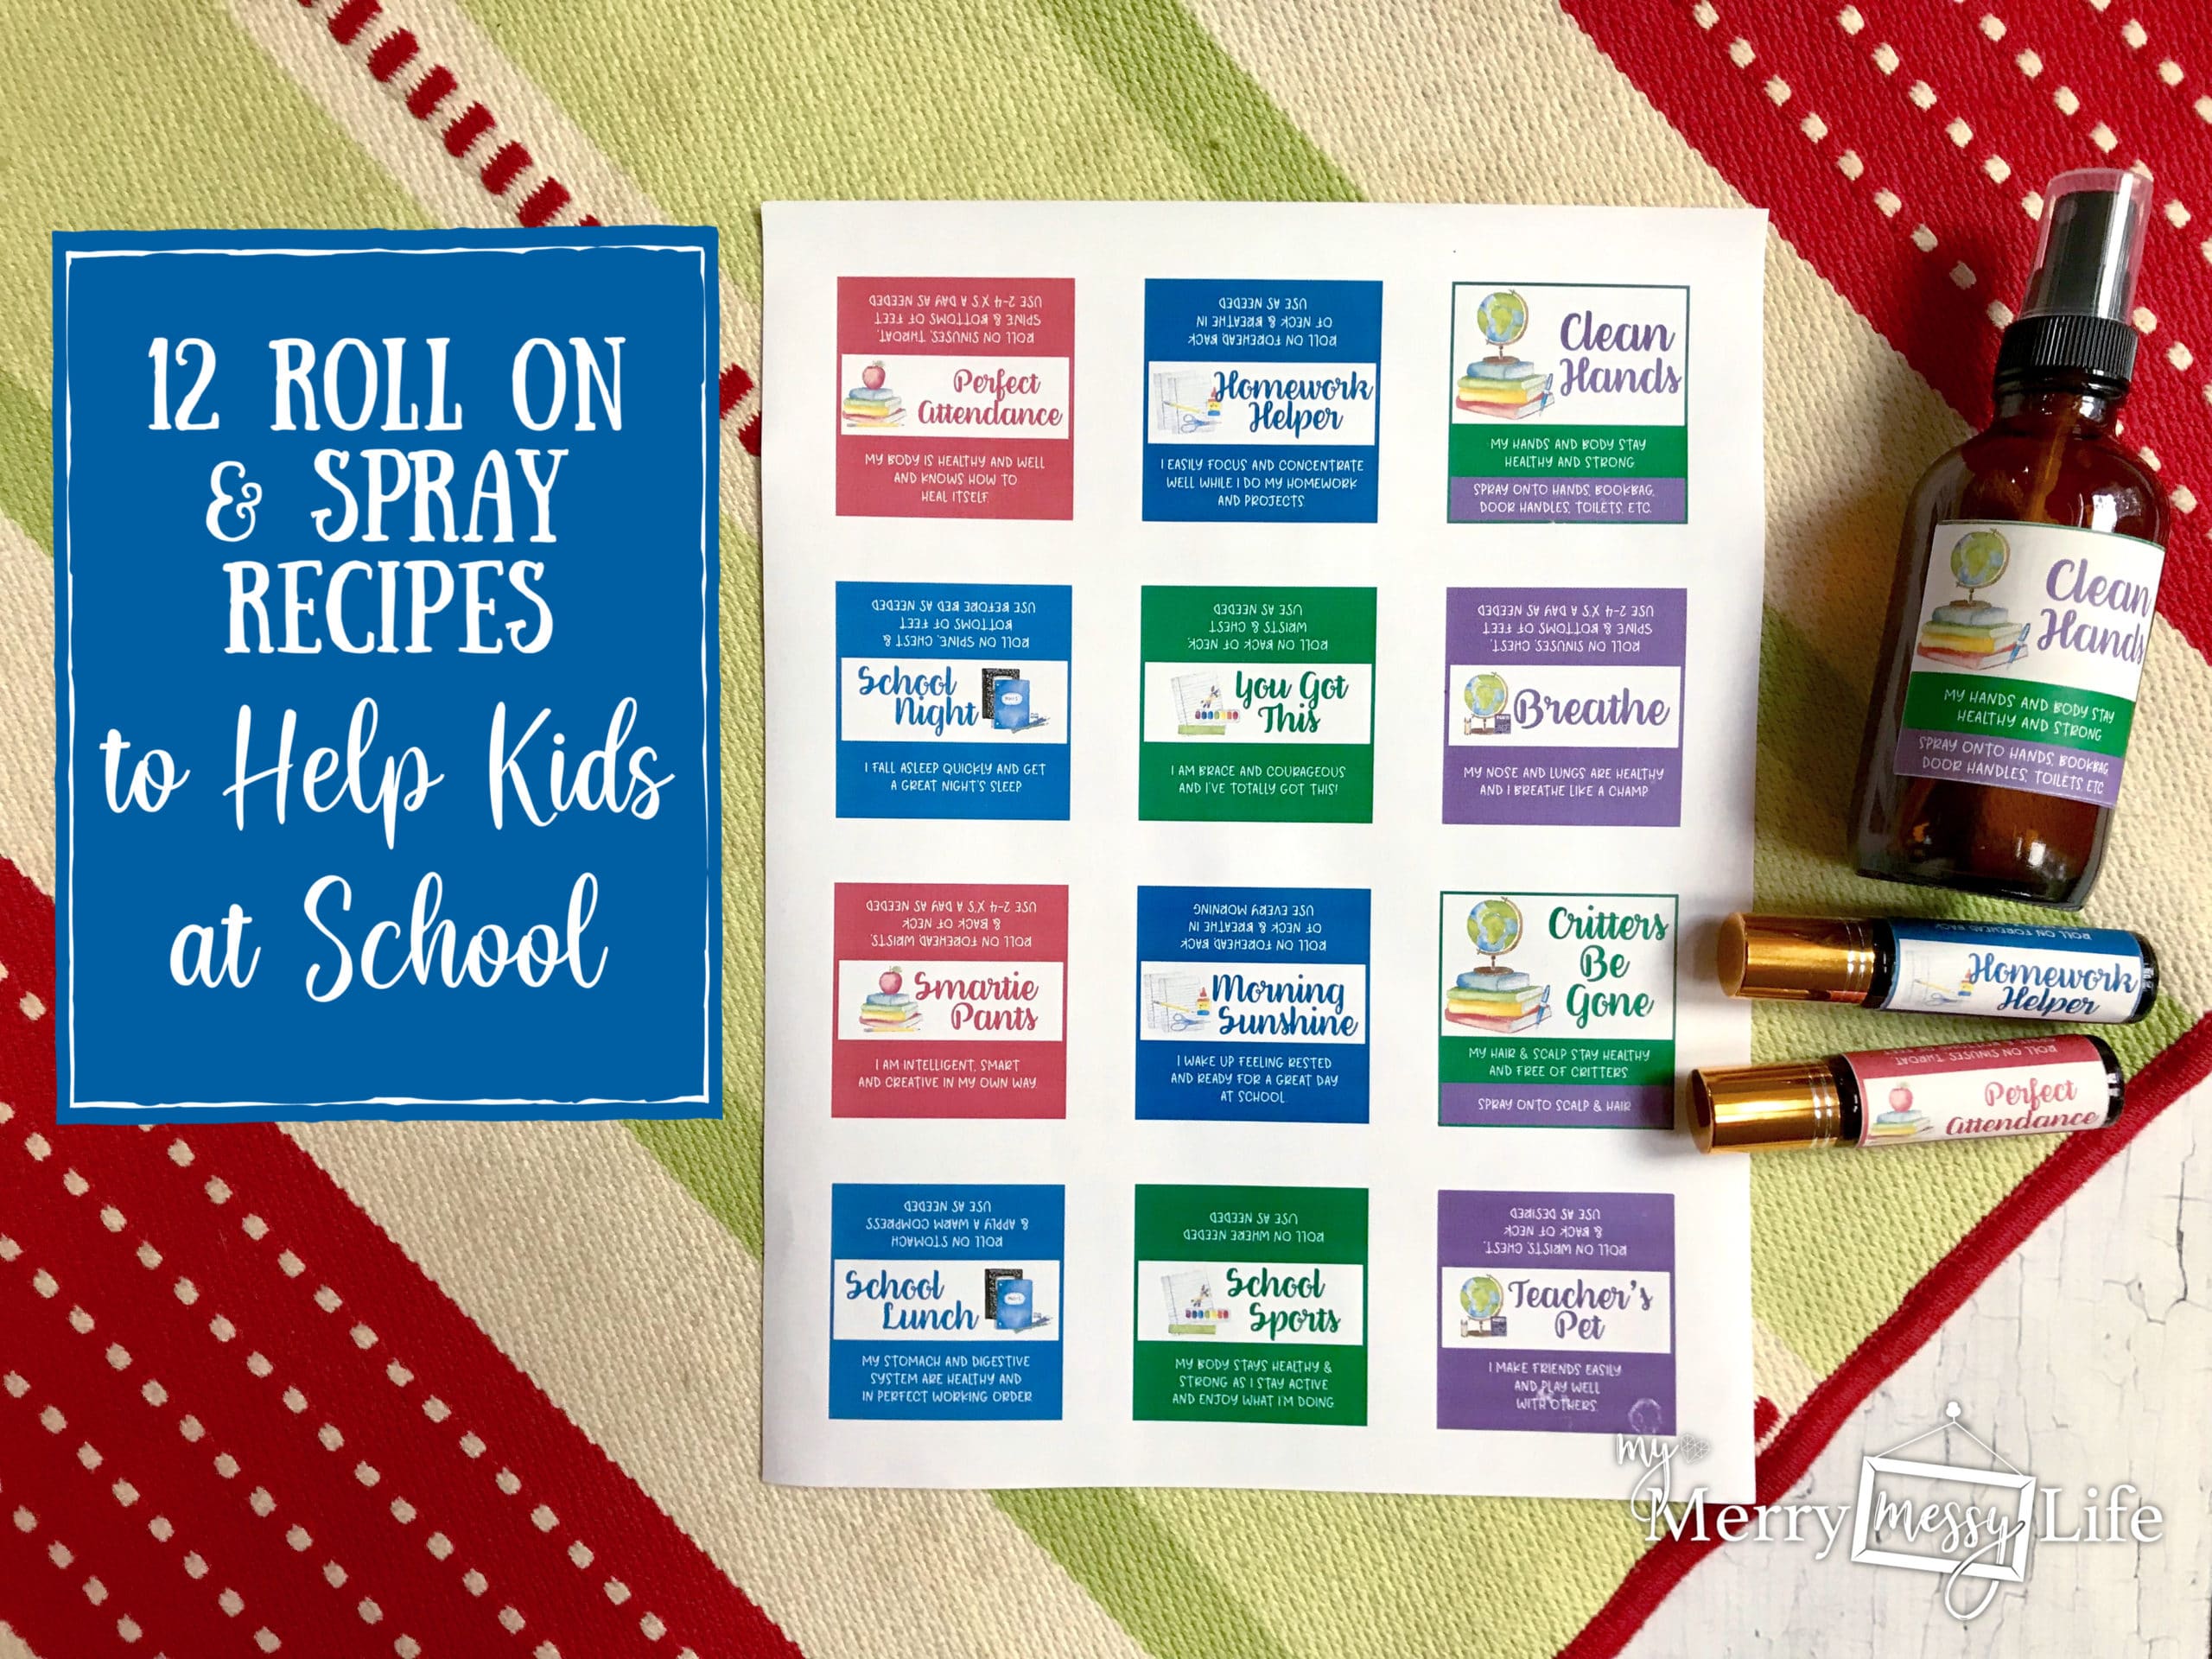 Back to School Roller Bottle and Spray Recipes Using Essential Oils from Young Living